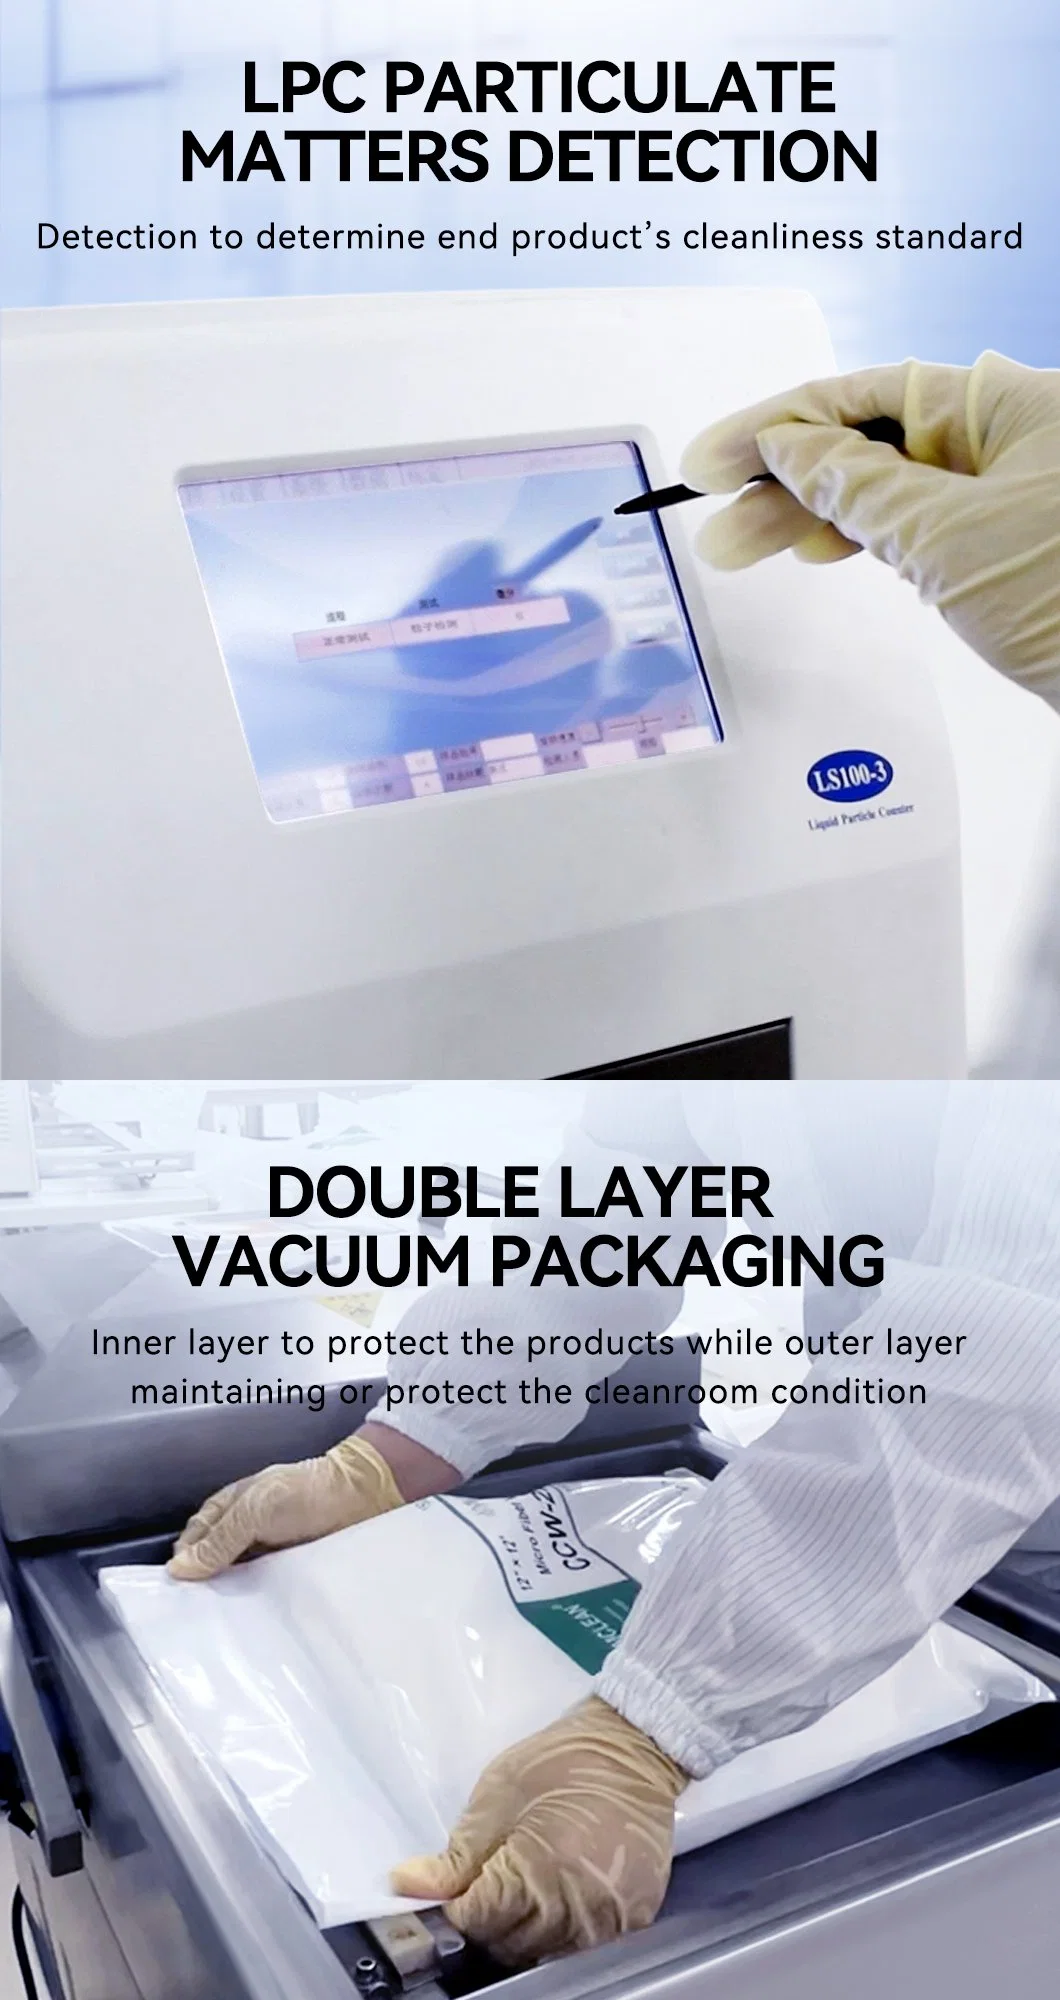 Class 10-1000 Polyester Cleanroom Wipe Cloth Have Passed ISO Certification Weigh 130g